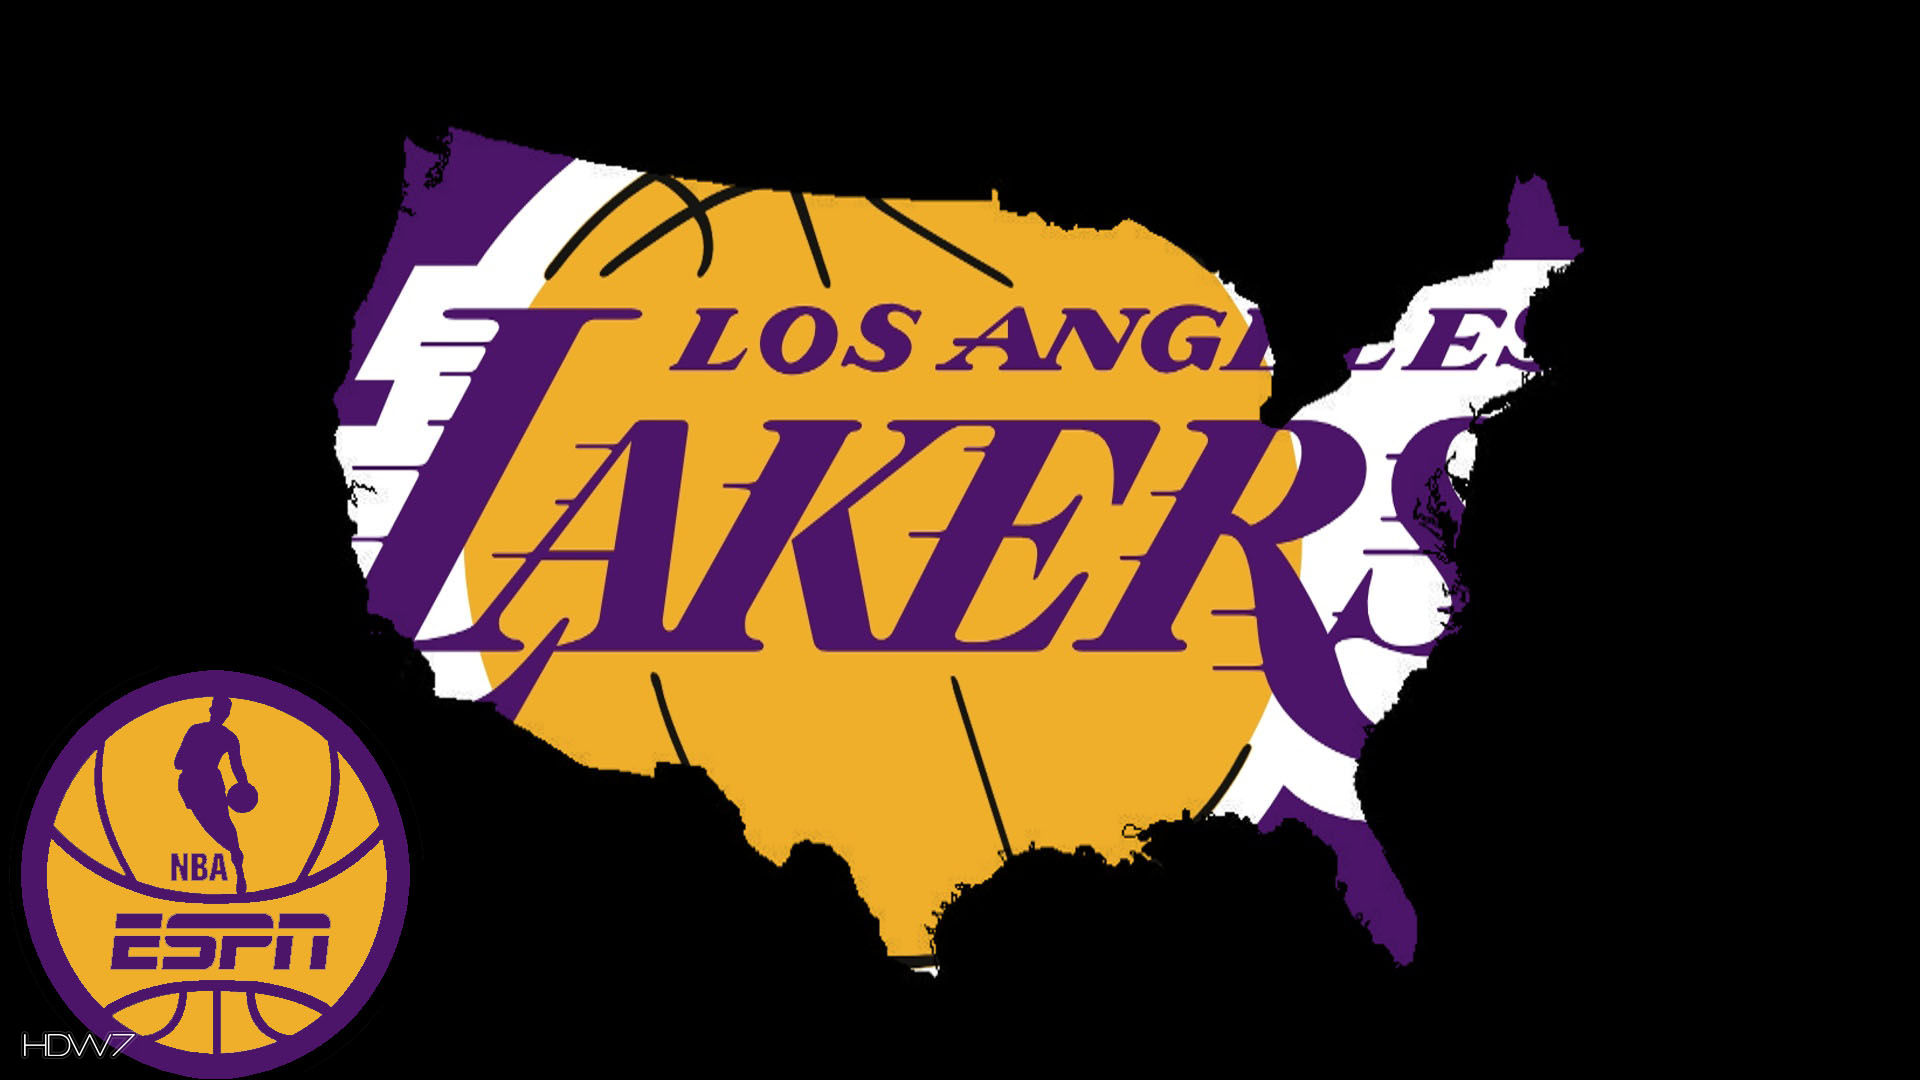  hdw7comwallpapers 127nba usa los angeles lakers 1920x1080html